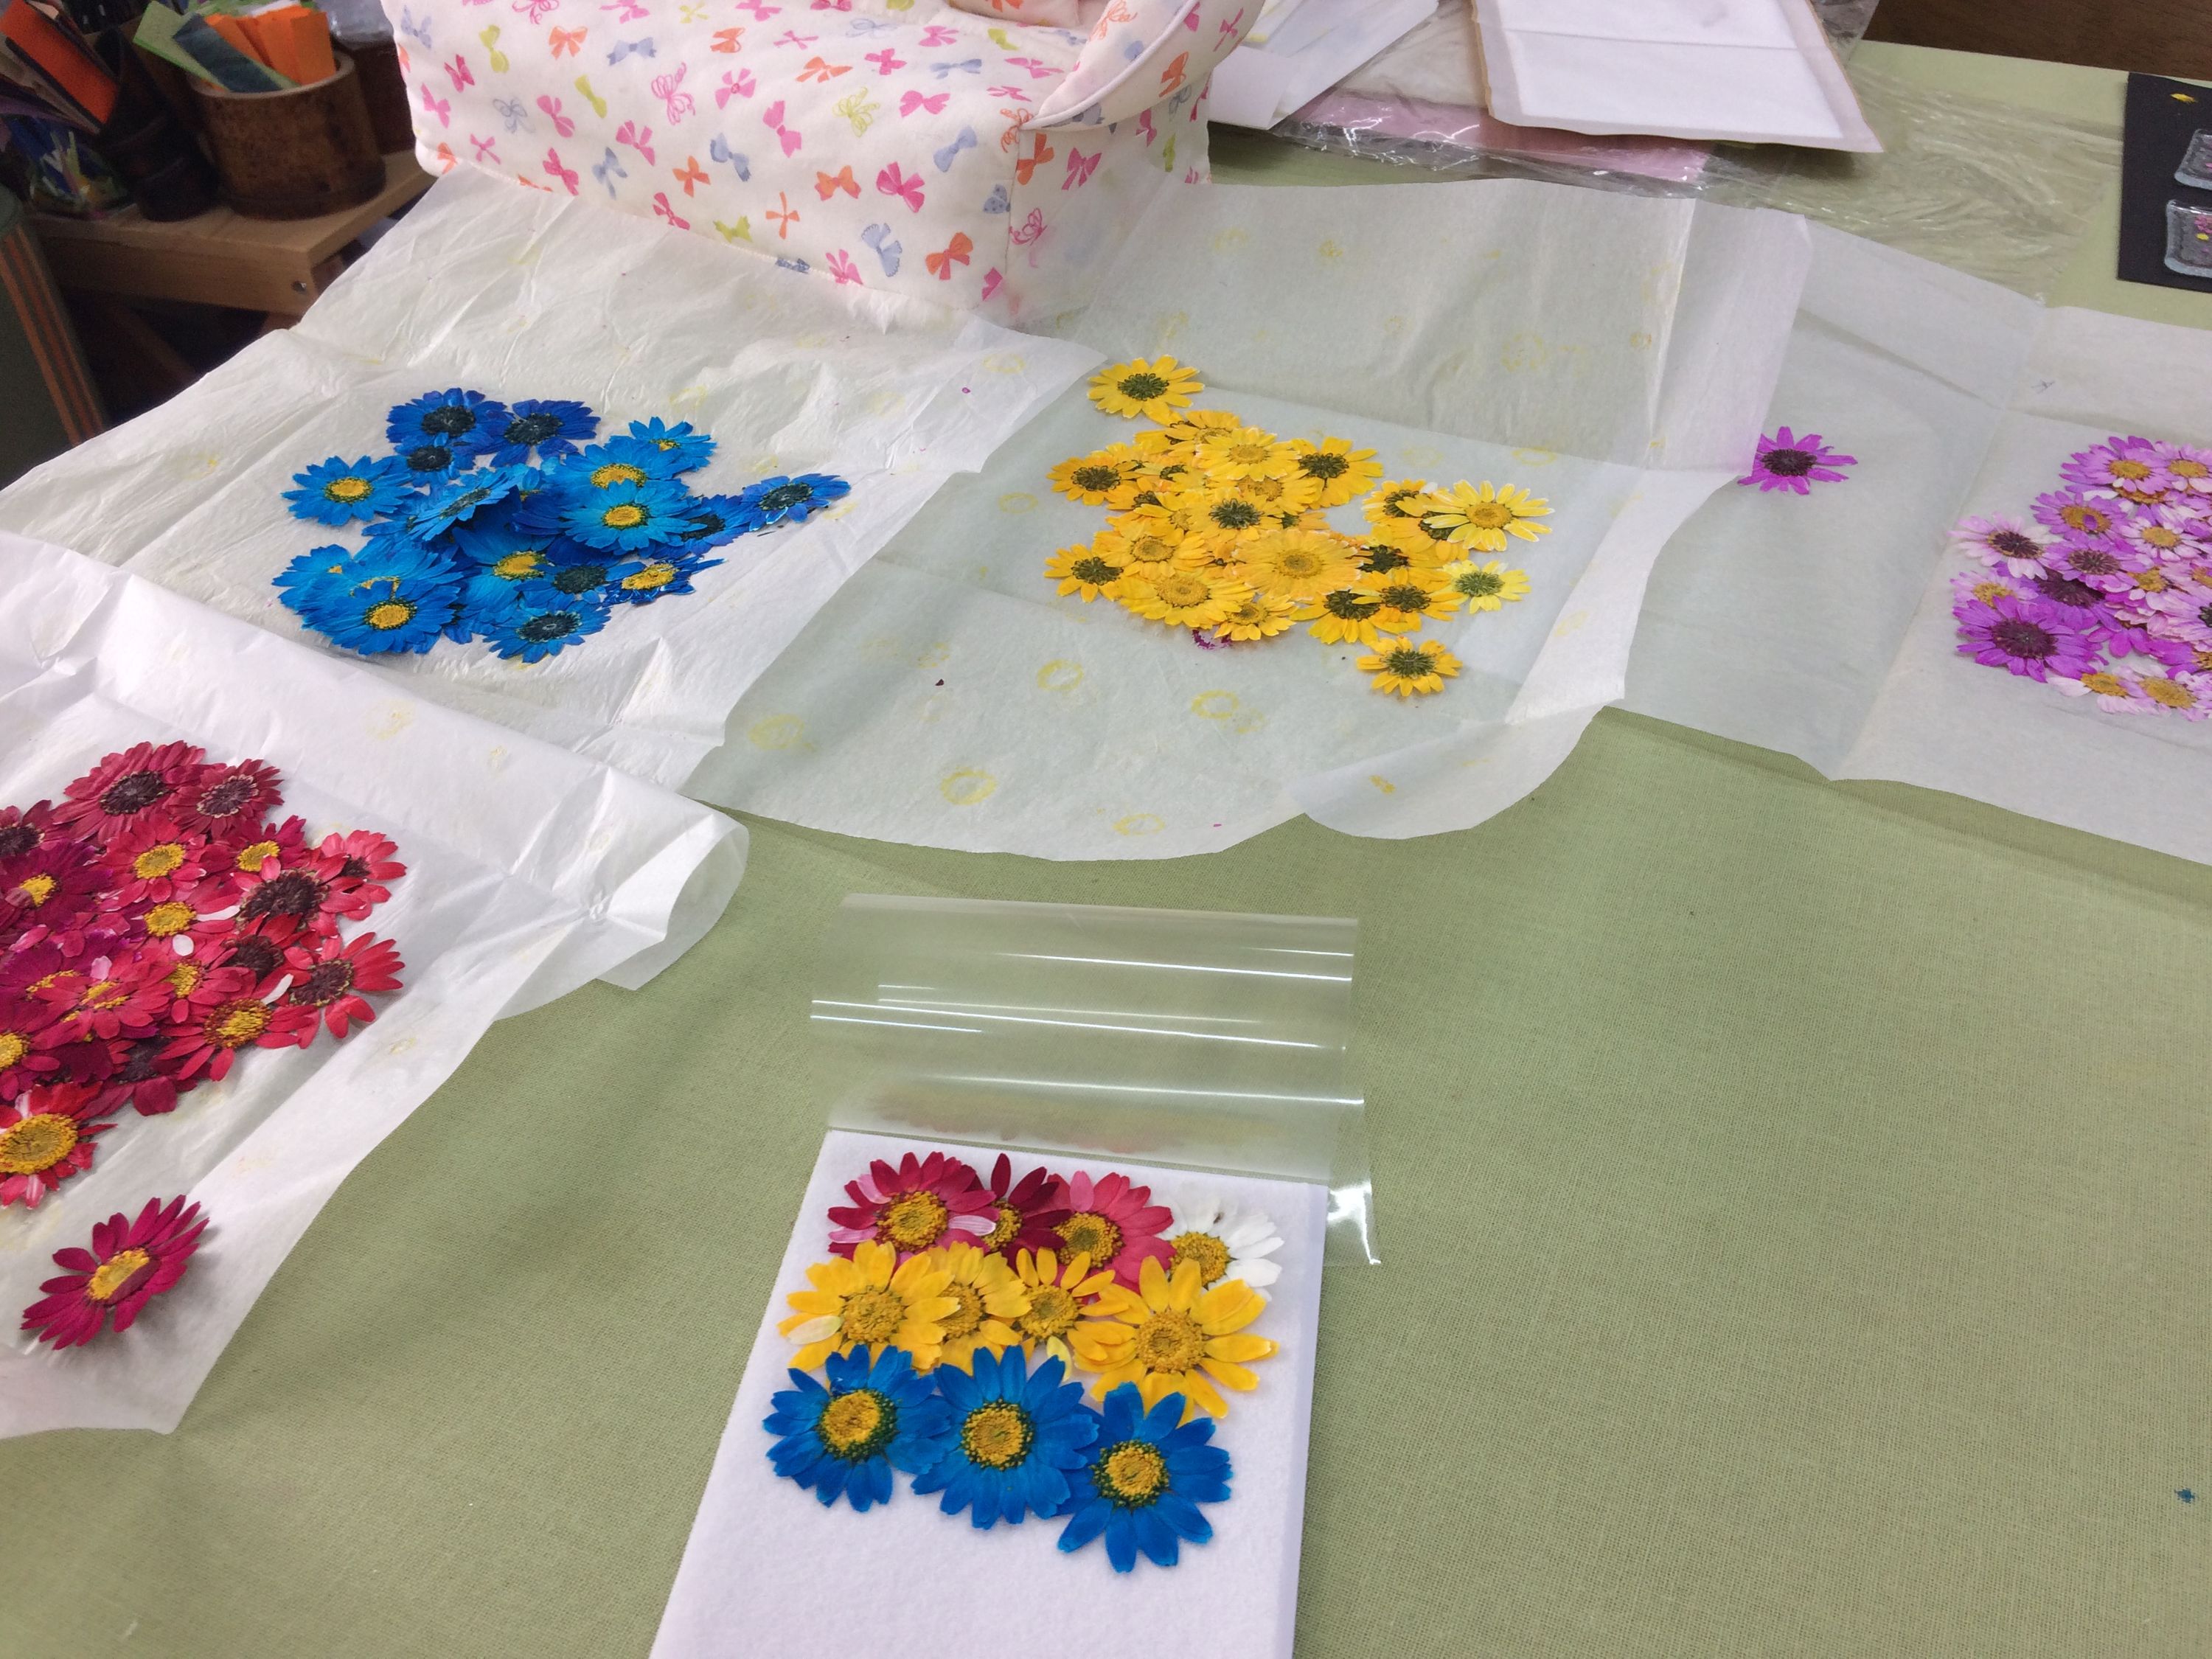 Colorful pressed flowers on pieces of white paper on a table.